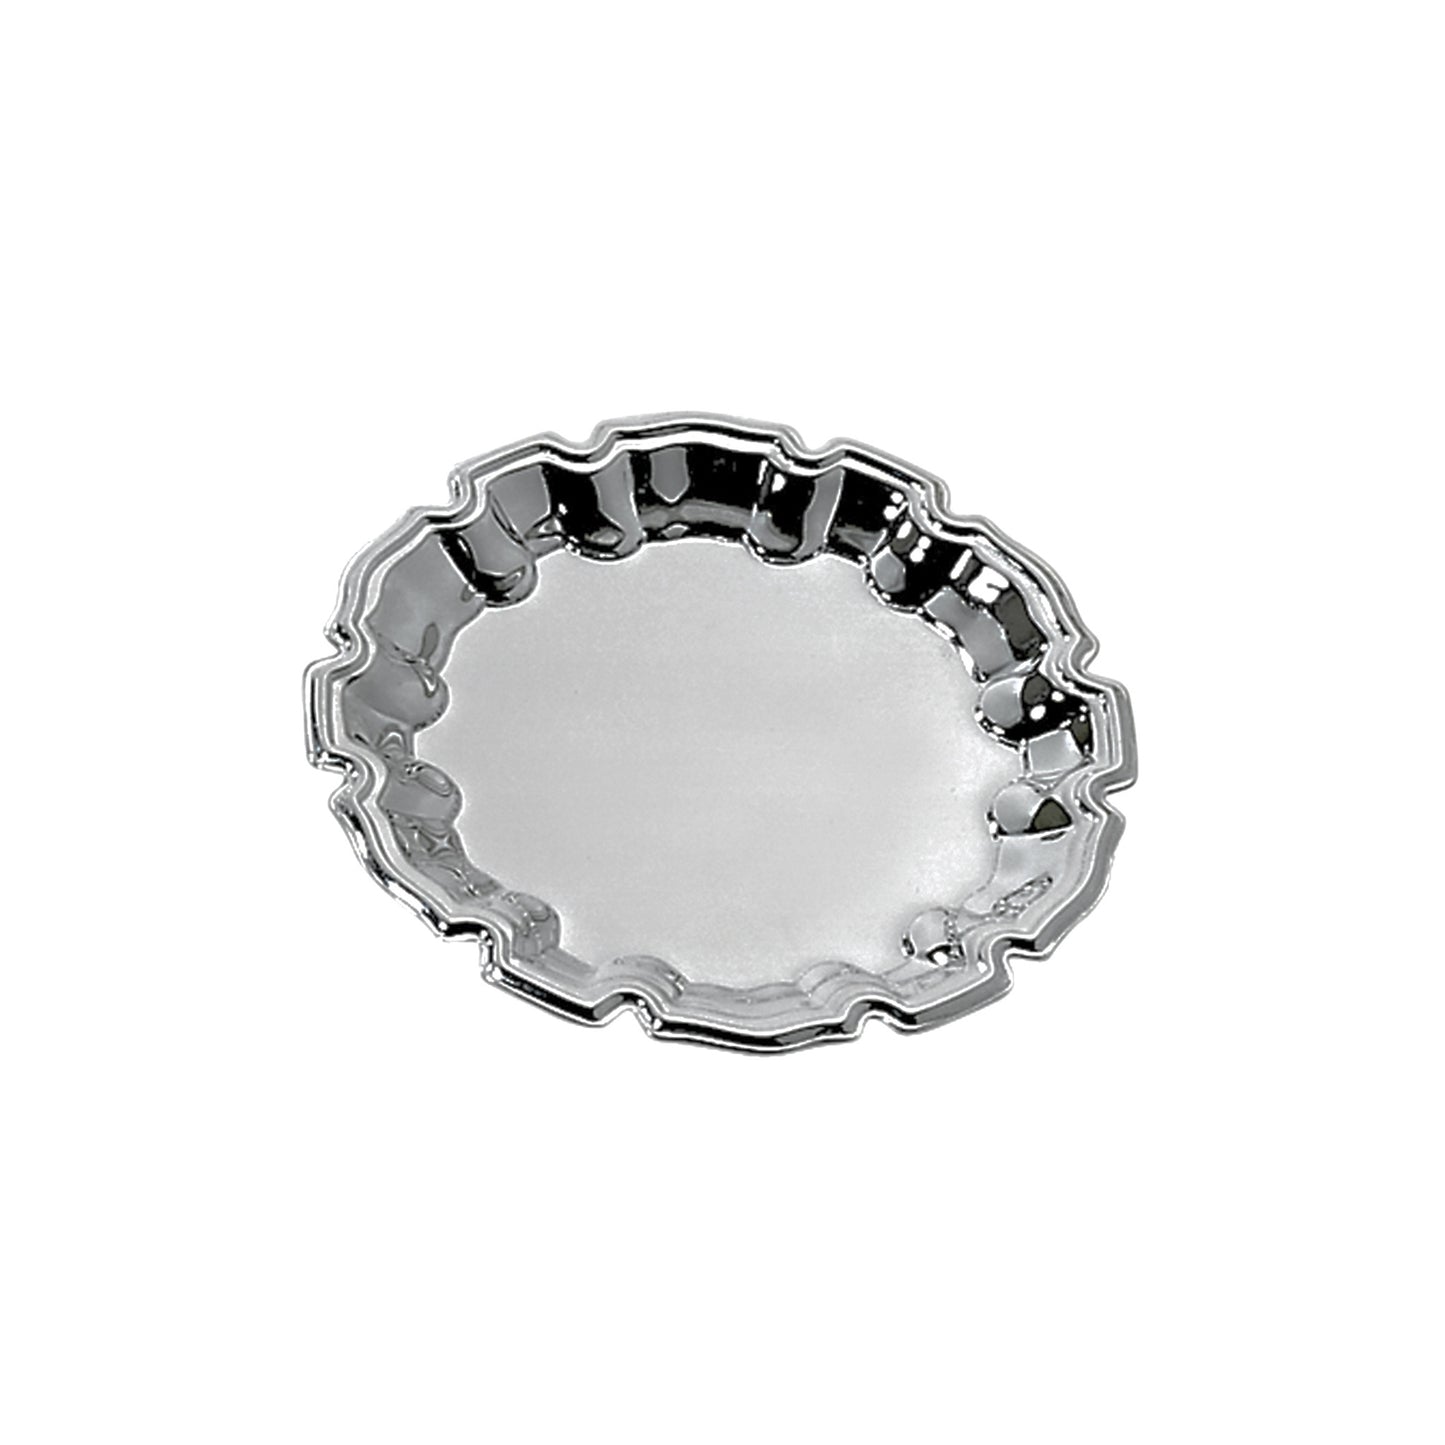 Chippendale Style Tray - 7"